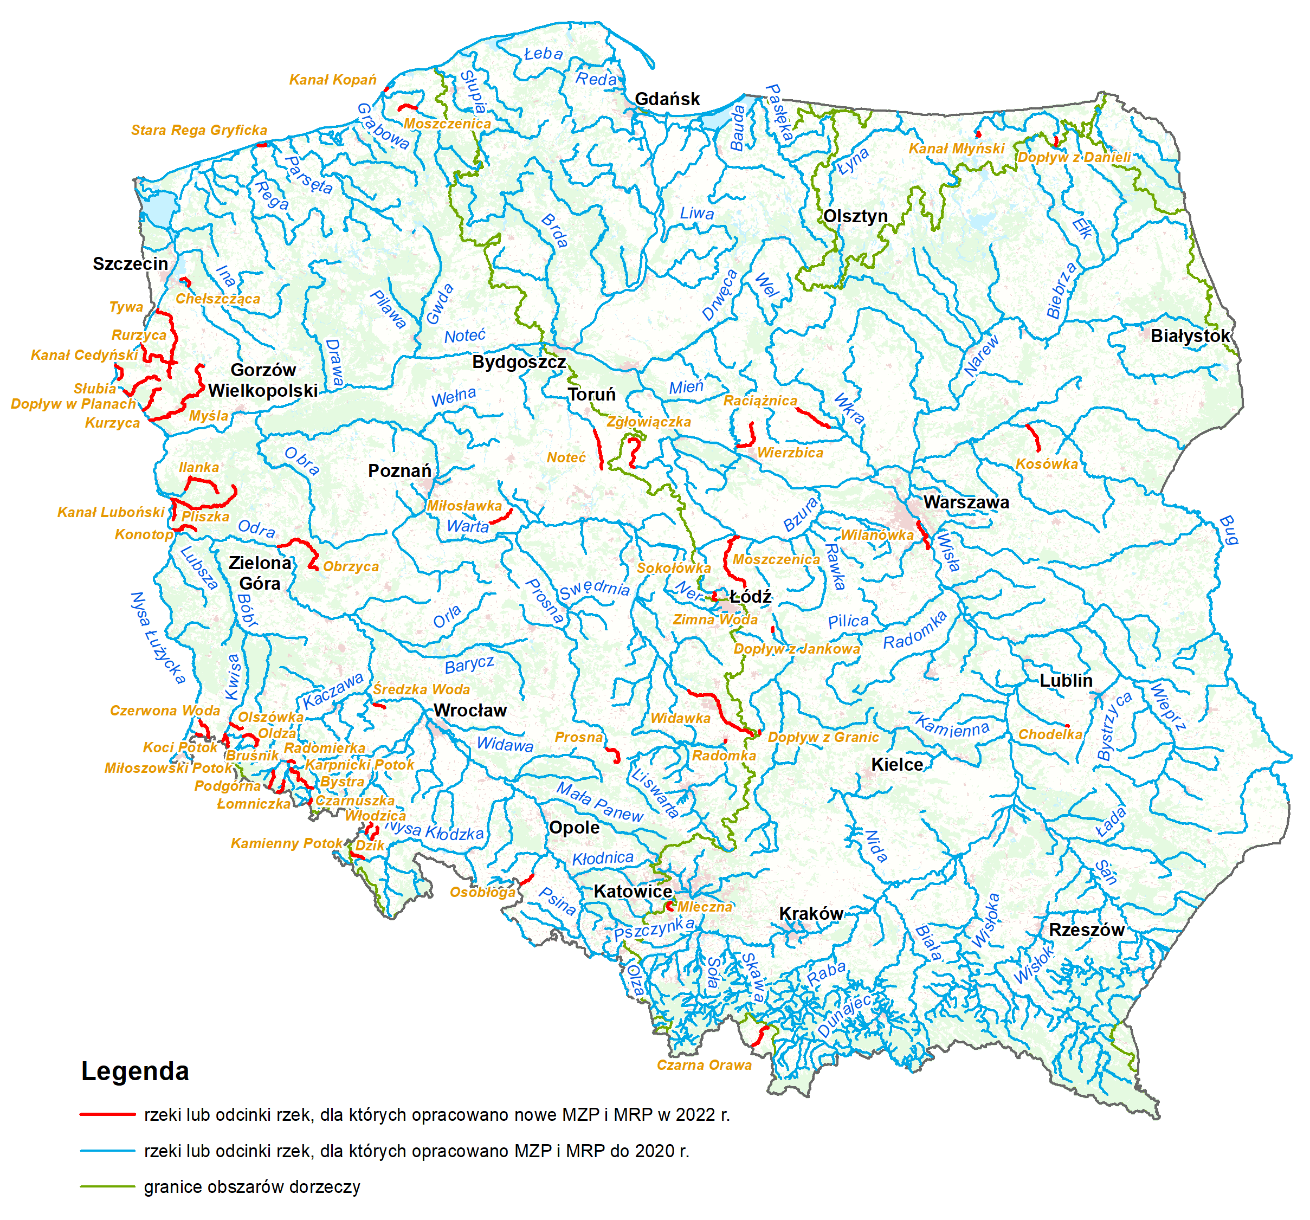 Rivers and river sections with new FHM and FRM in 2022